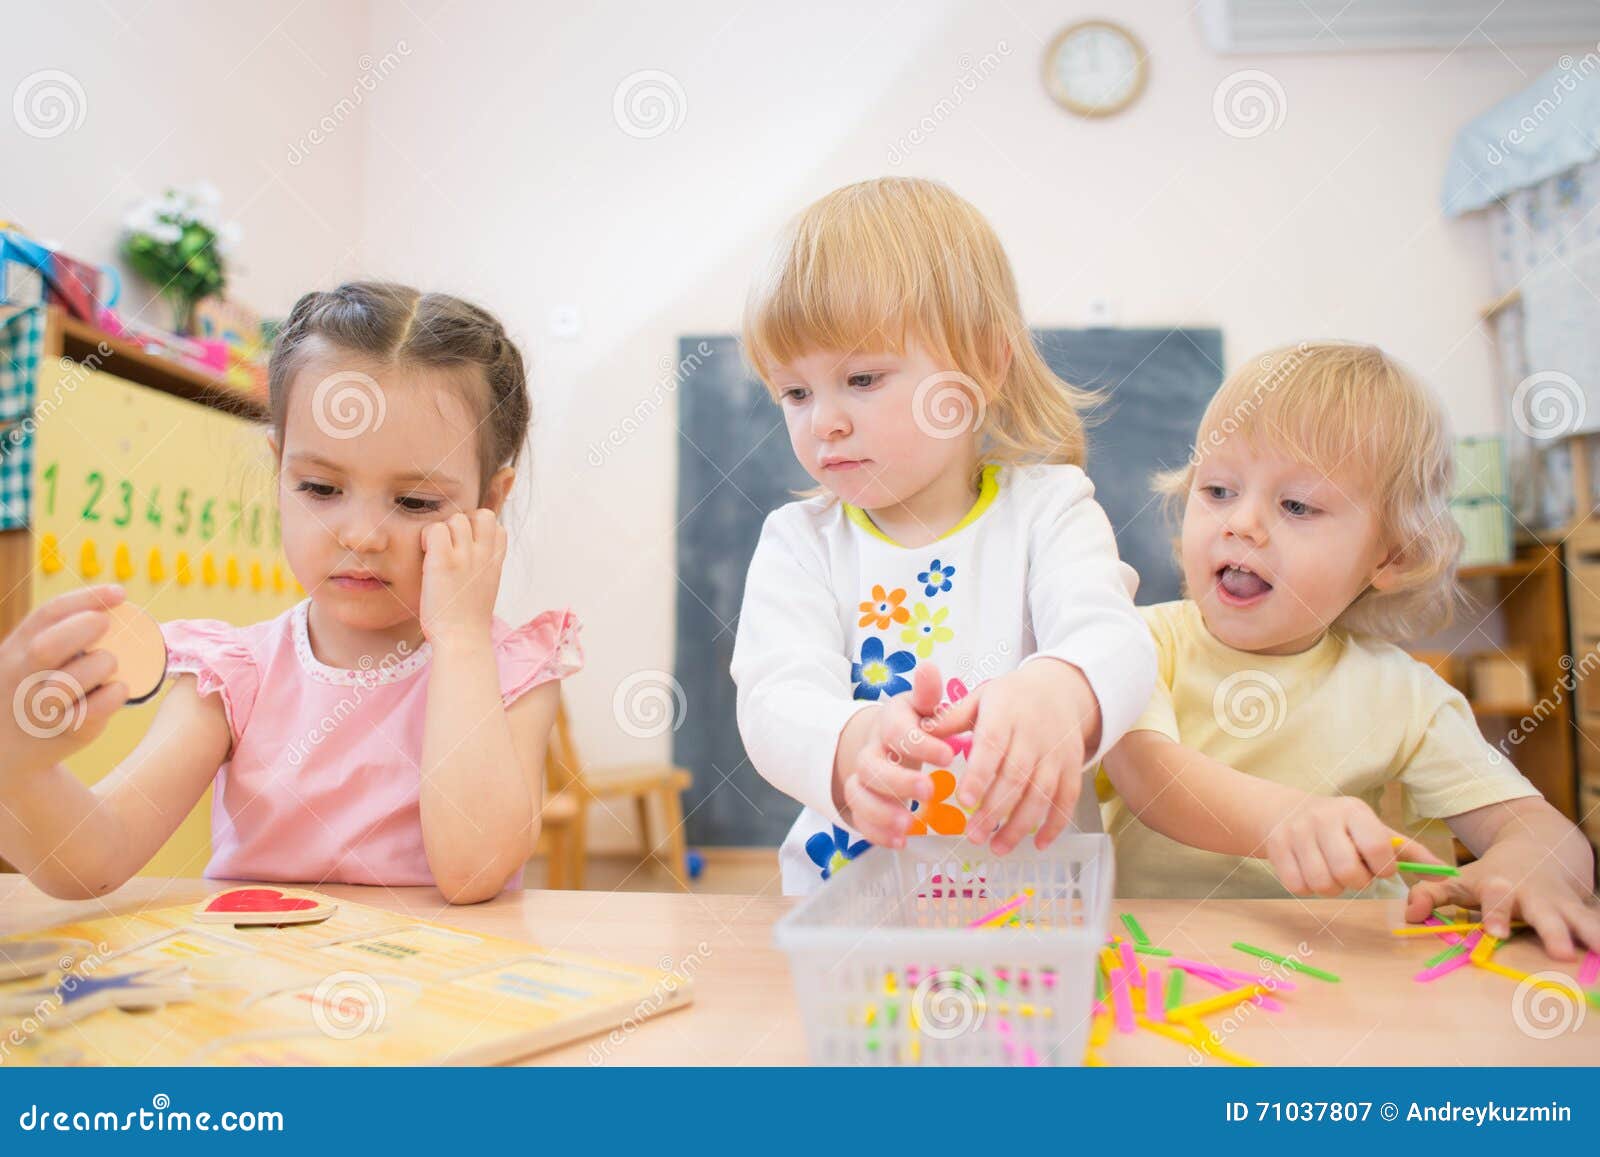 Little pre-school girl learns to solve puzzles online and plays educational  games on tablet at home - a Royalty Free Stock Photo from Photocase